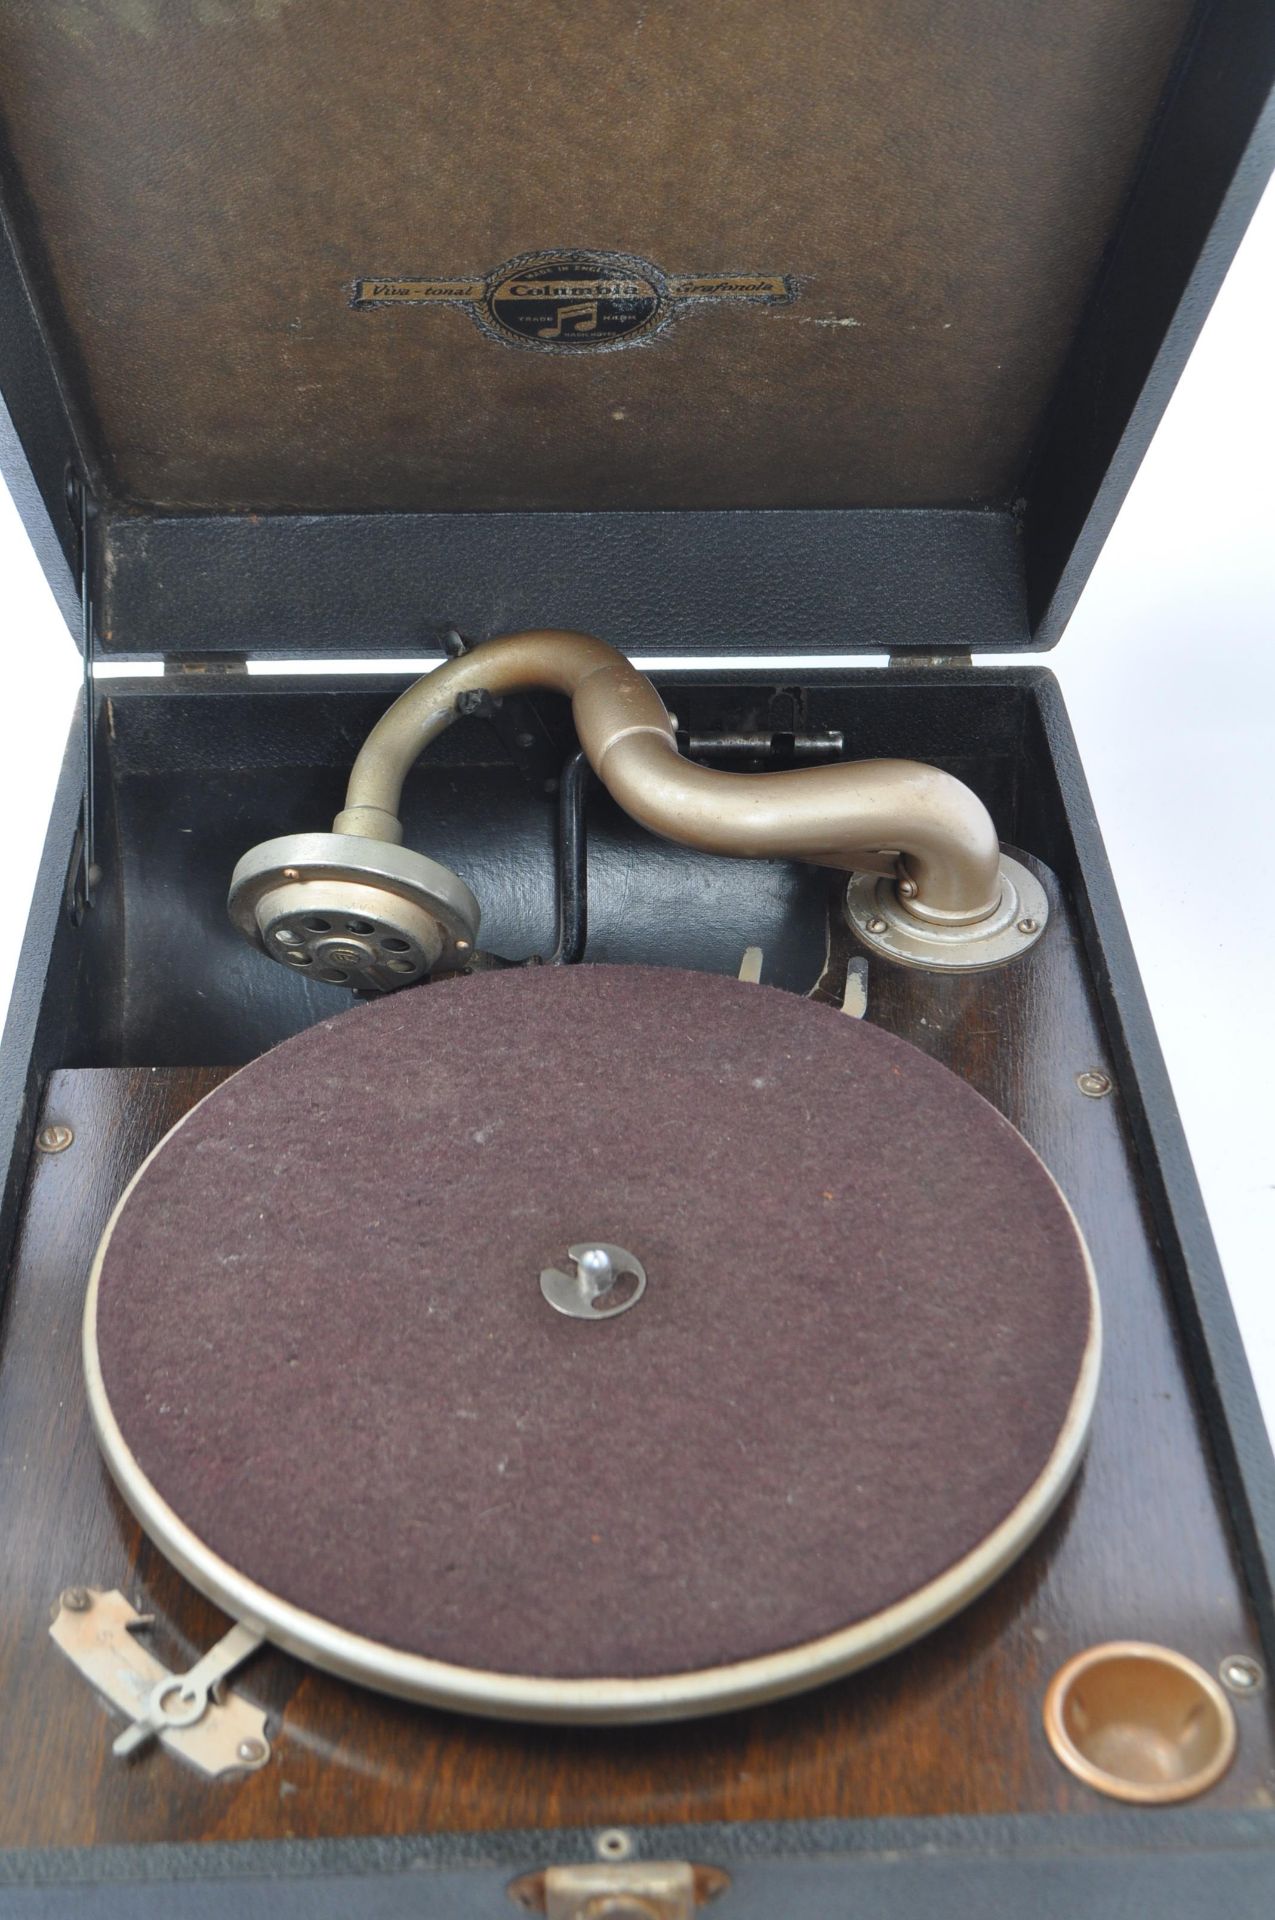 20TH CENTURY PORTABLE GRAMOPHONE BY COLUMBIA WITH DISCS - Image 3 of 4